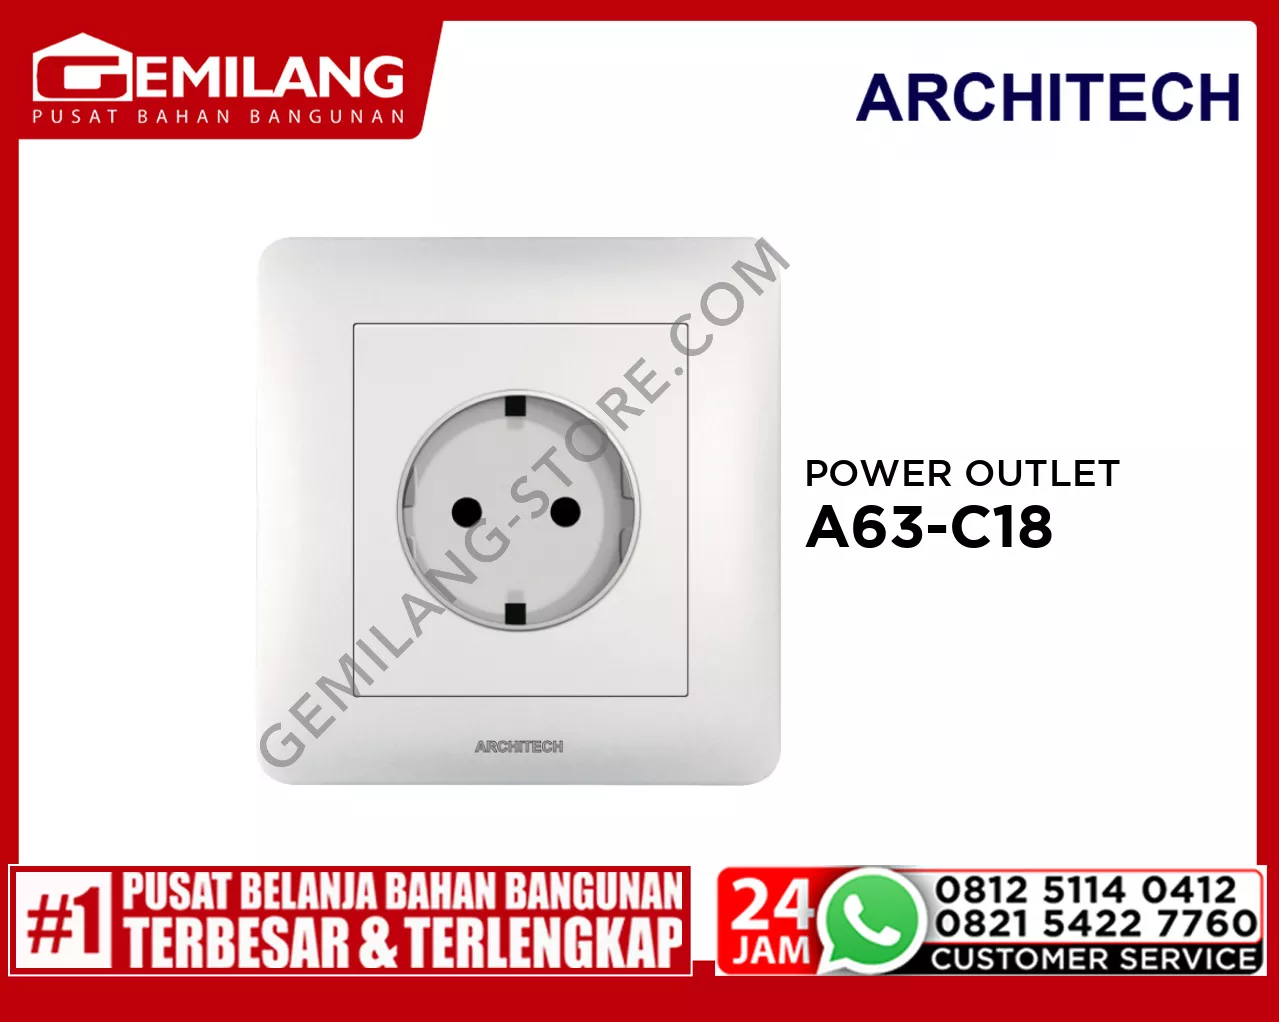 ARCHITECH POWER OUTLET INFINITY A63-C18 16A WH